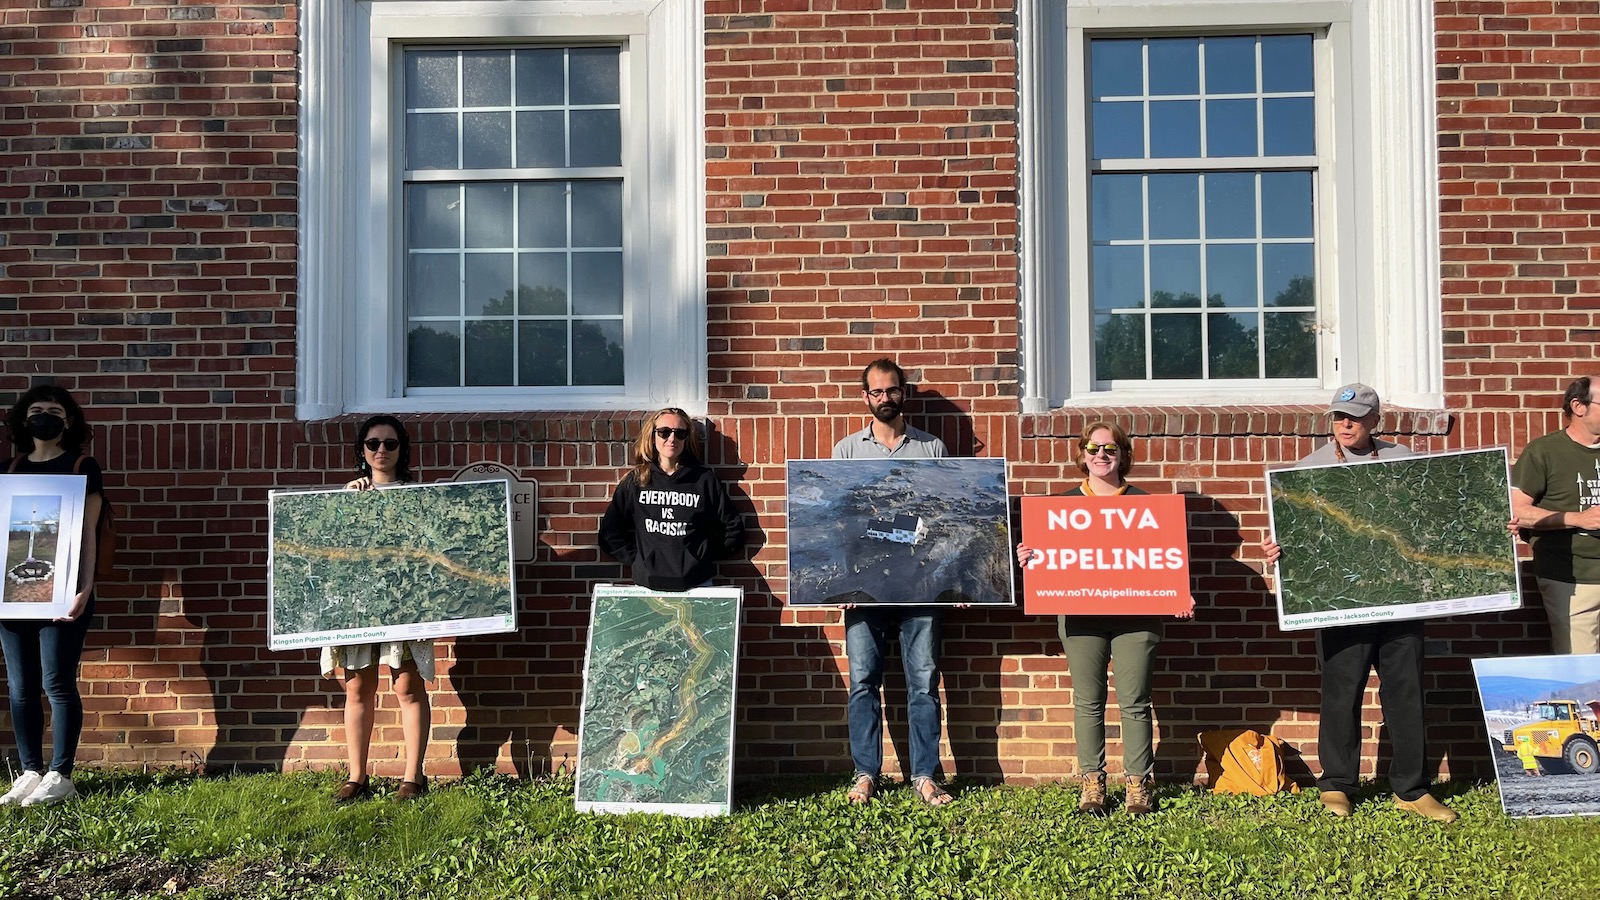 Seven people holding protest signs in front of the brick wall of a building during a demonstration against a proposal by the Tennessee Valley Authority to build two natural gas power plants.